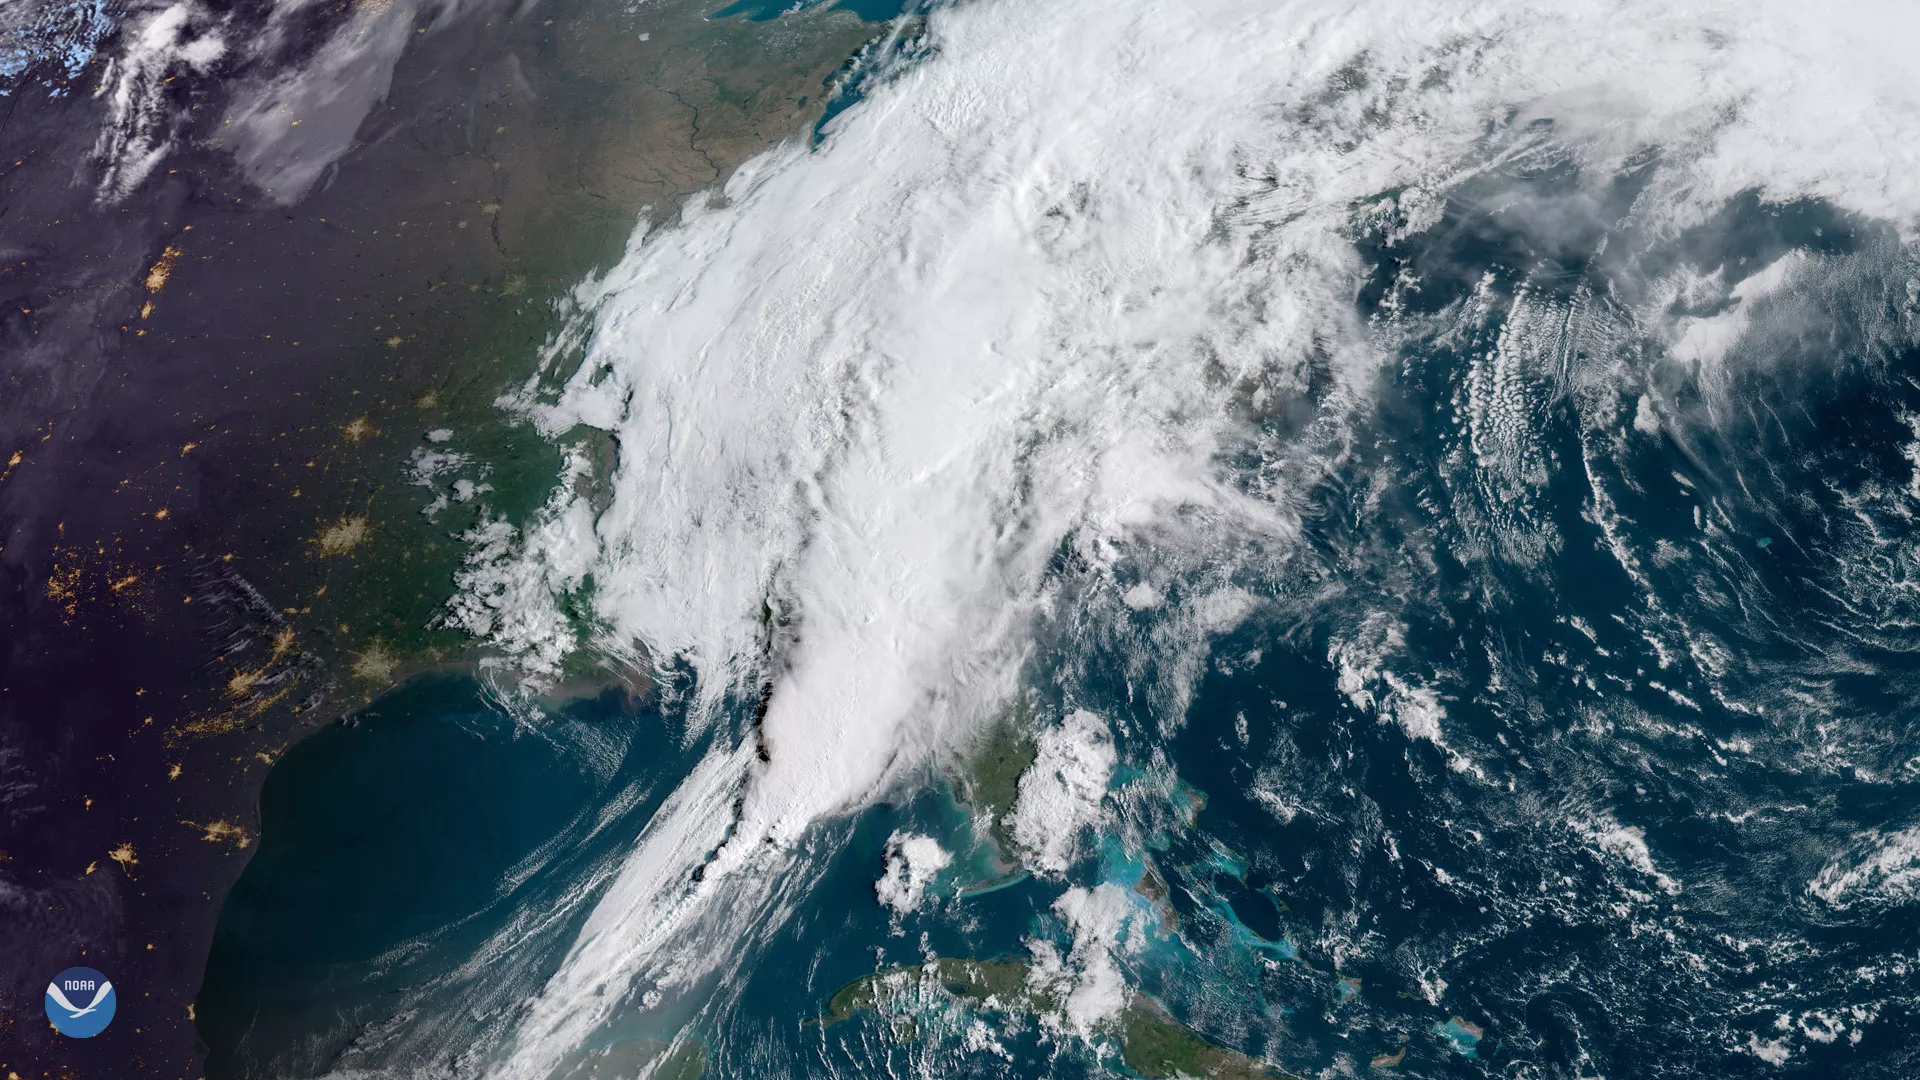 April 2019 capture of East Coast storm systems, in GeoColor, via GOES East. 